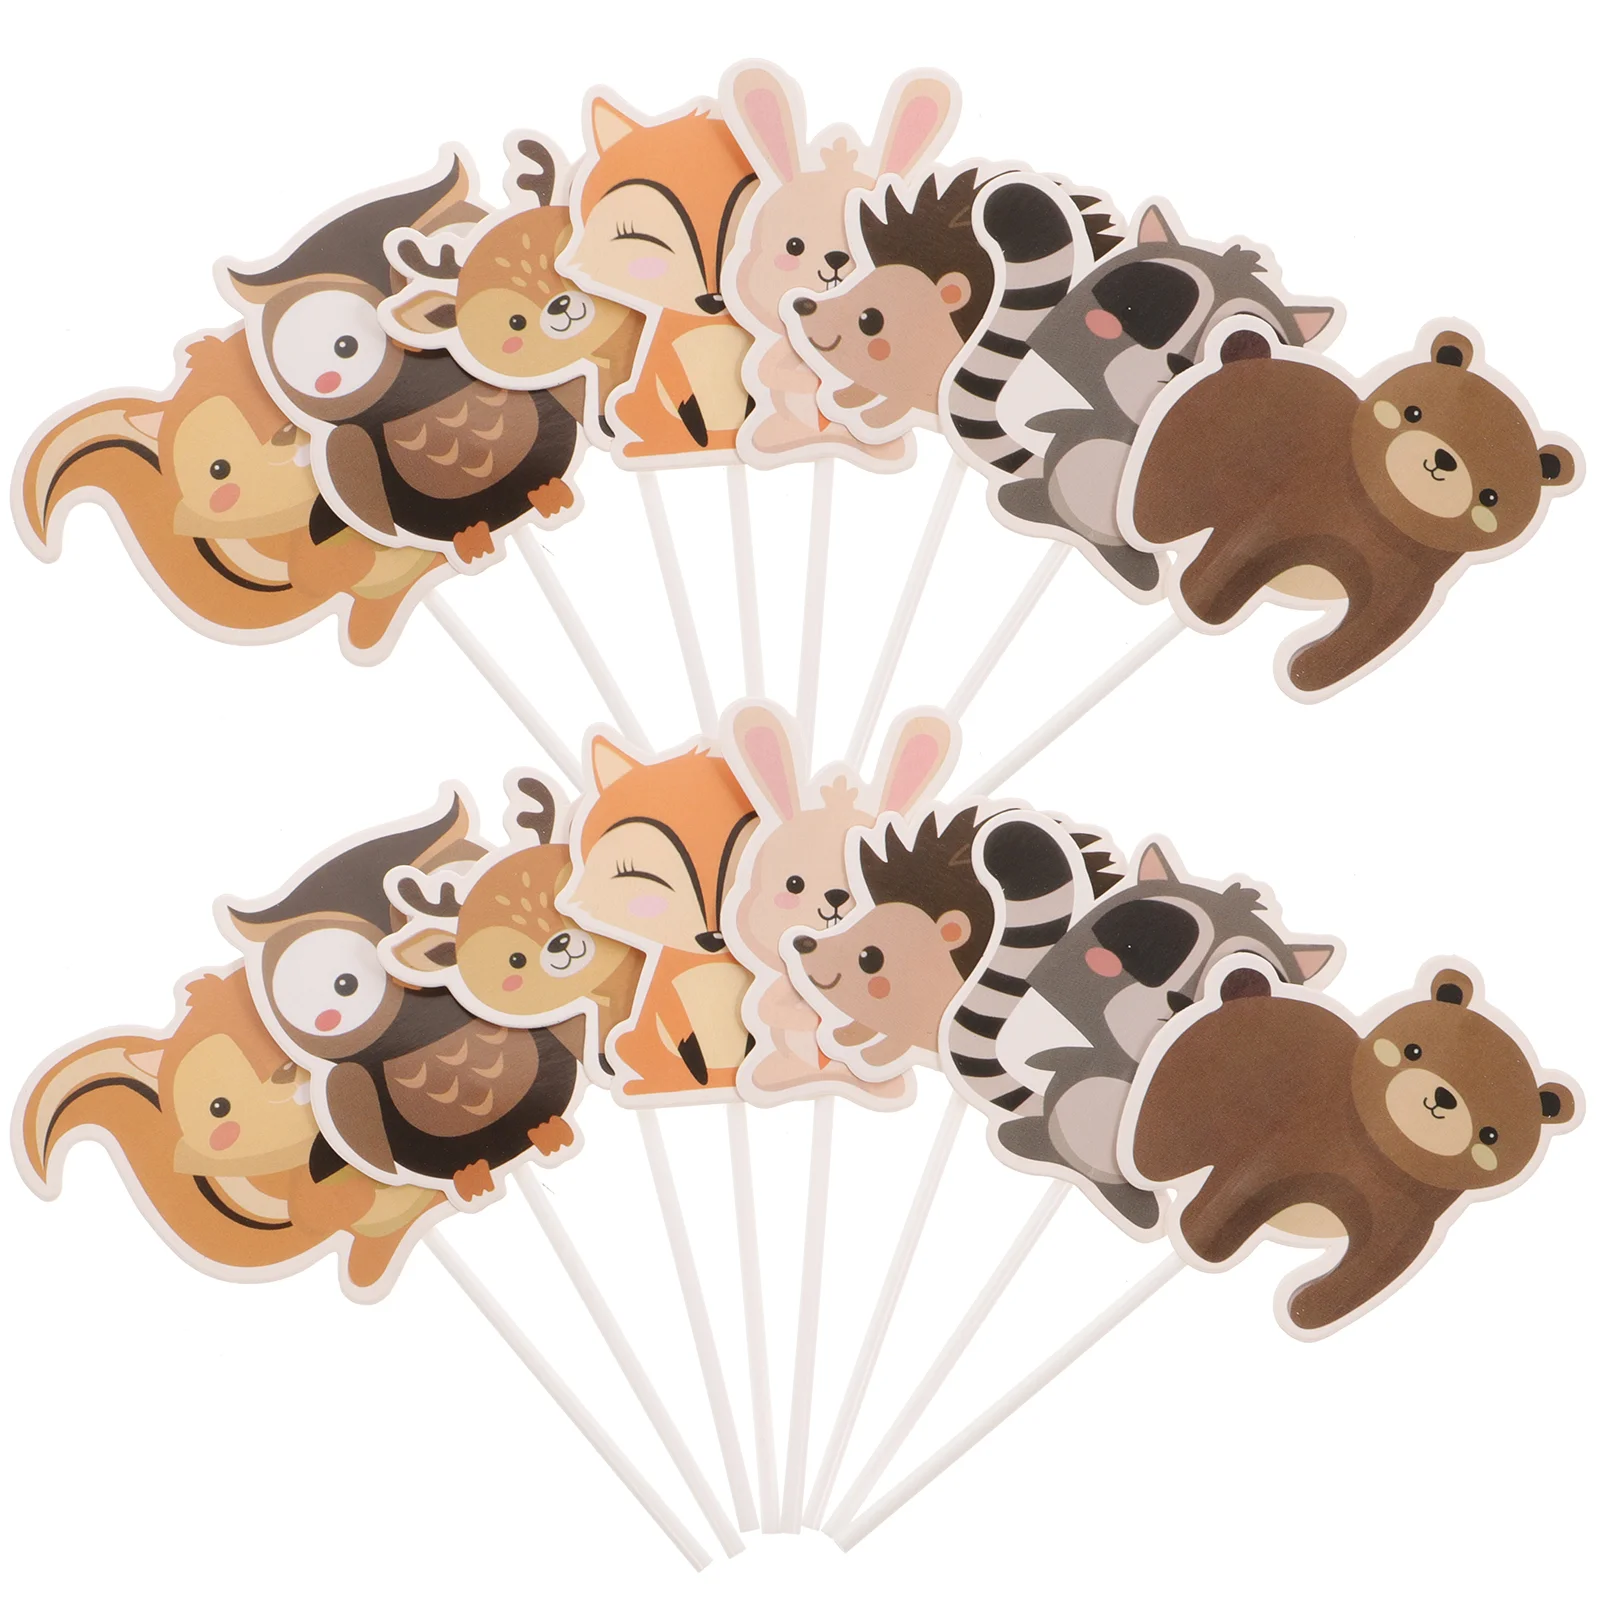 

Forest Animal Shape Cake Topper Picks Decoration Party Toppers Creative Woodland Animals Cupcake Ornament Kids